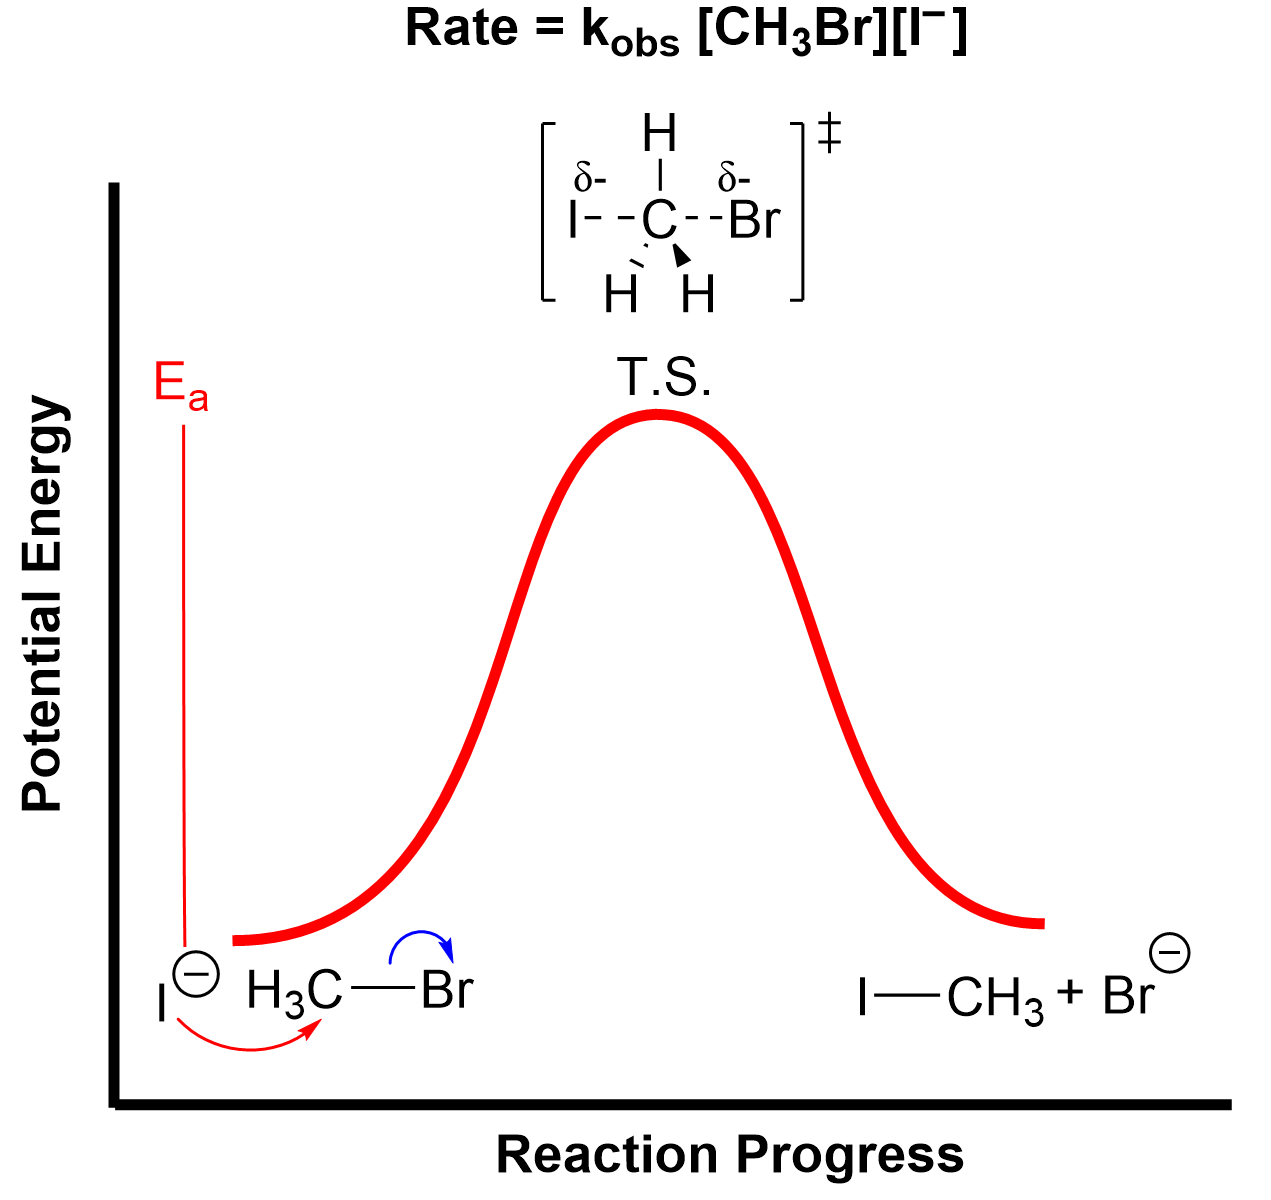 An energy profile diagram is drawn where there is an x-axis labeled reaction progress and a y-axis labeled potential energy. Additionally, the graph is labelled Rate = kobs [CH3Br][I-]. There is a red bell-shaped curve where the last point ends higher than the starting point. There’s a vertical line drawn from the lowest to the highest point of the curve and labelled Ea for activation energy. Underneath the starting point an iodide (I-) has an arrow tail from one of its lone pairs with the arrowhead pointing towards the carbon of bromomethane and the bond between carbon and bromine is broken, depicted by curved arrows. The highest point is labelled T.S for transition state and in square brackets bromomethane is drawn using the spatial model where I and Br are both attached to C with dotted lines, including symbols for partially negative on either halogen. The final point of the curve is iodomethane and bromide (Br-).